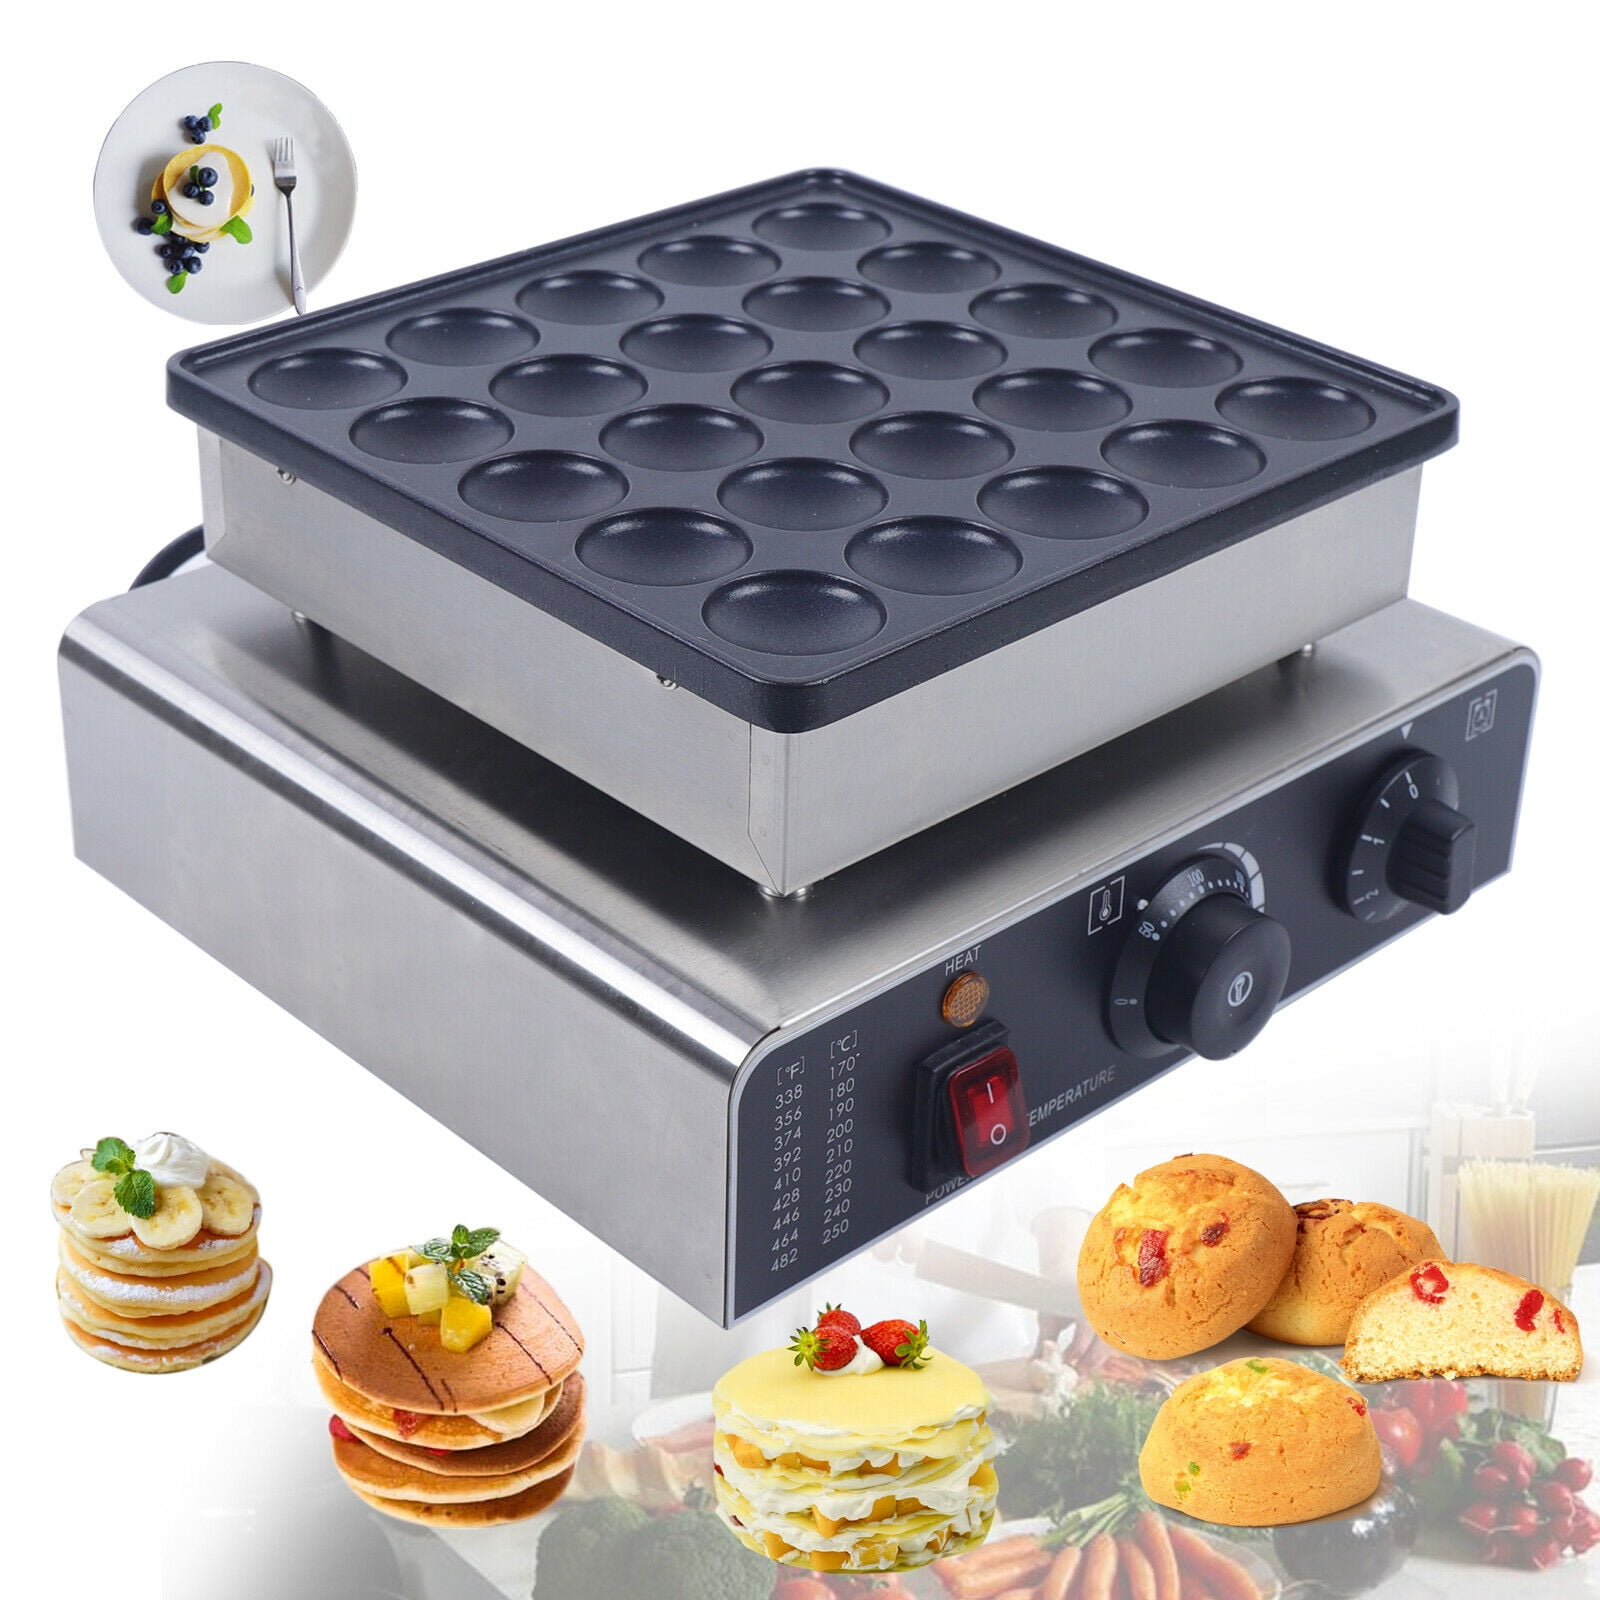 the Quick Stack™ Pancake Maker